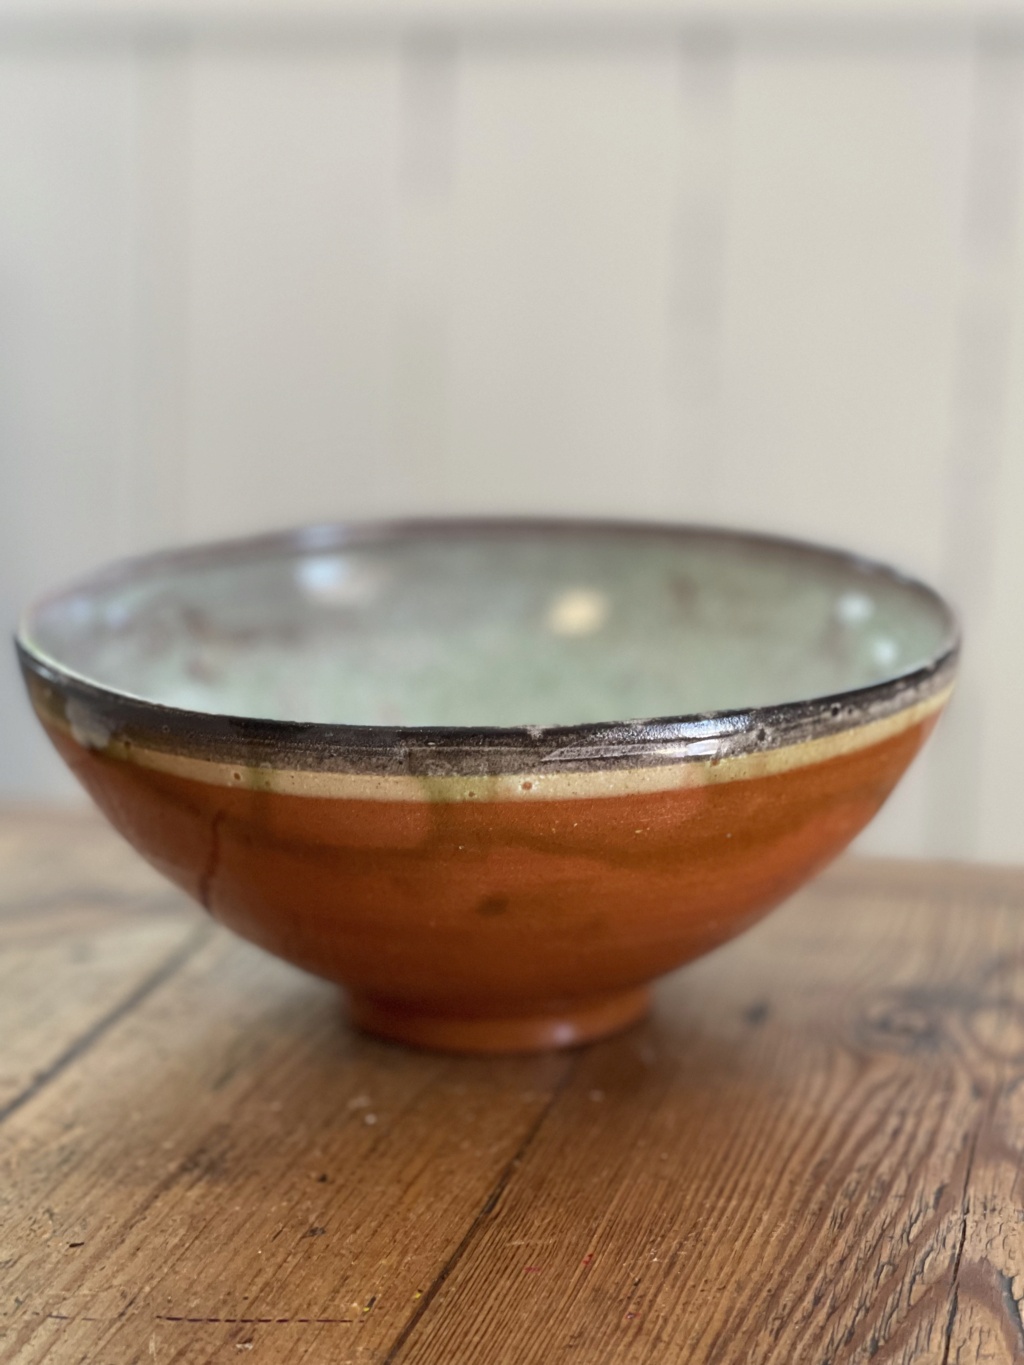 Can anyone identify this lovely green glazed bowl, PS mark B908a710